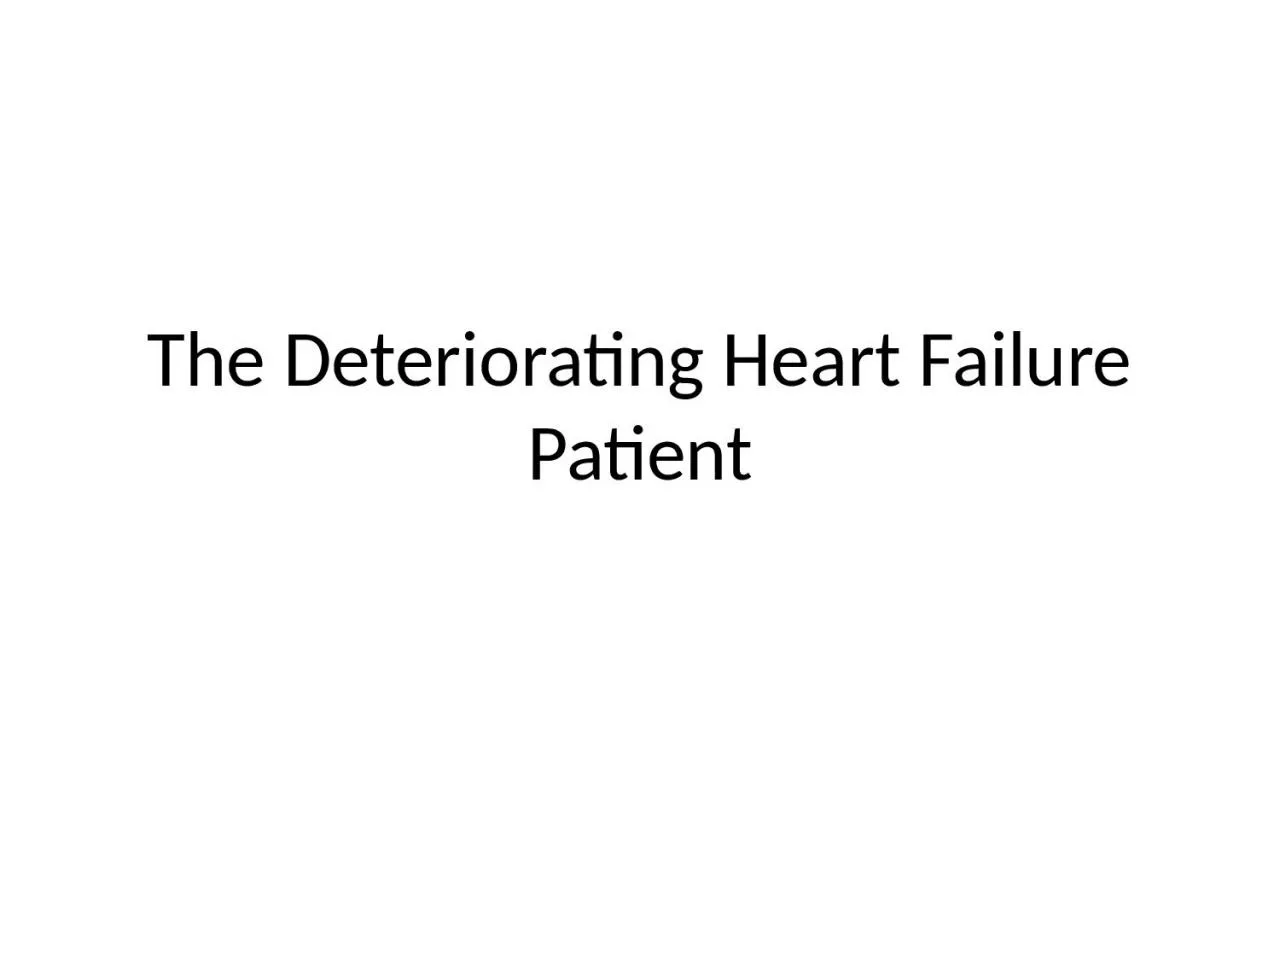 The Deteriorating Heart Failure Patient